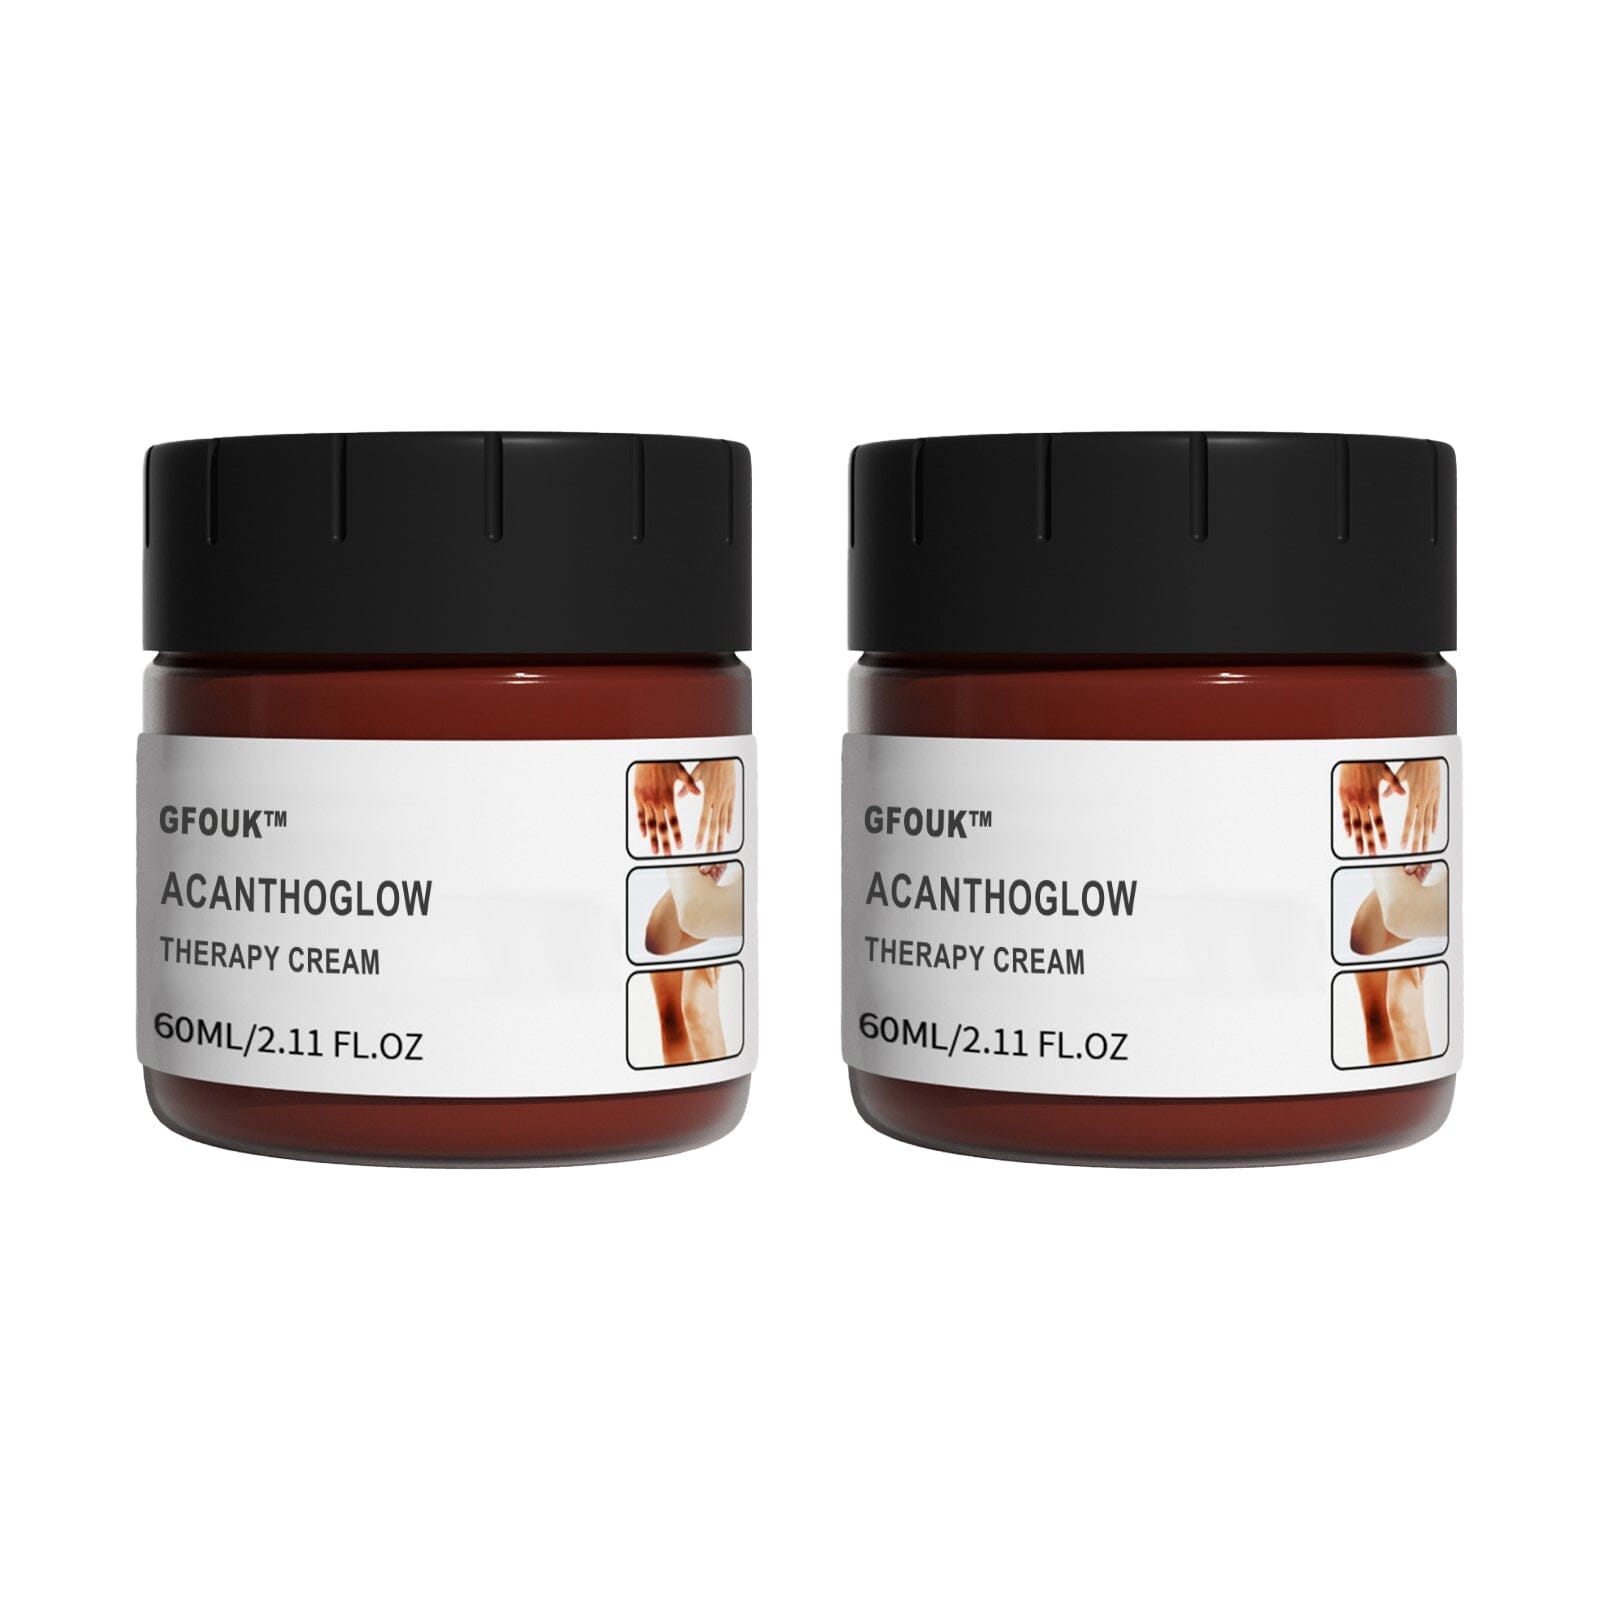 GFOUK™ AcanthoGlow Therapy Cream 1688 2PCS USD29.97 ❤️50% OFF❤️ 